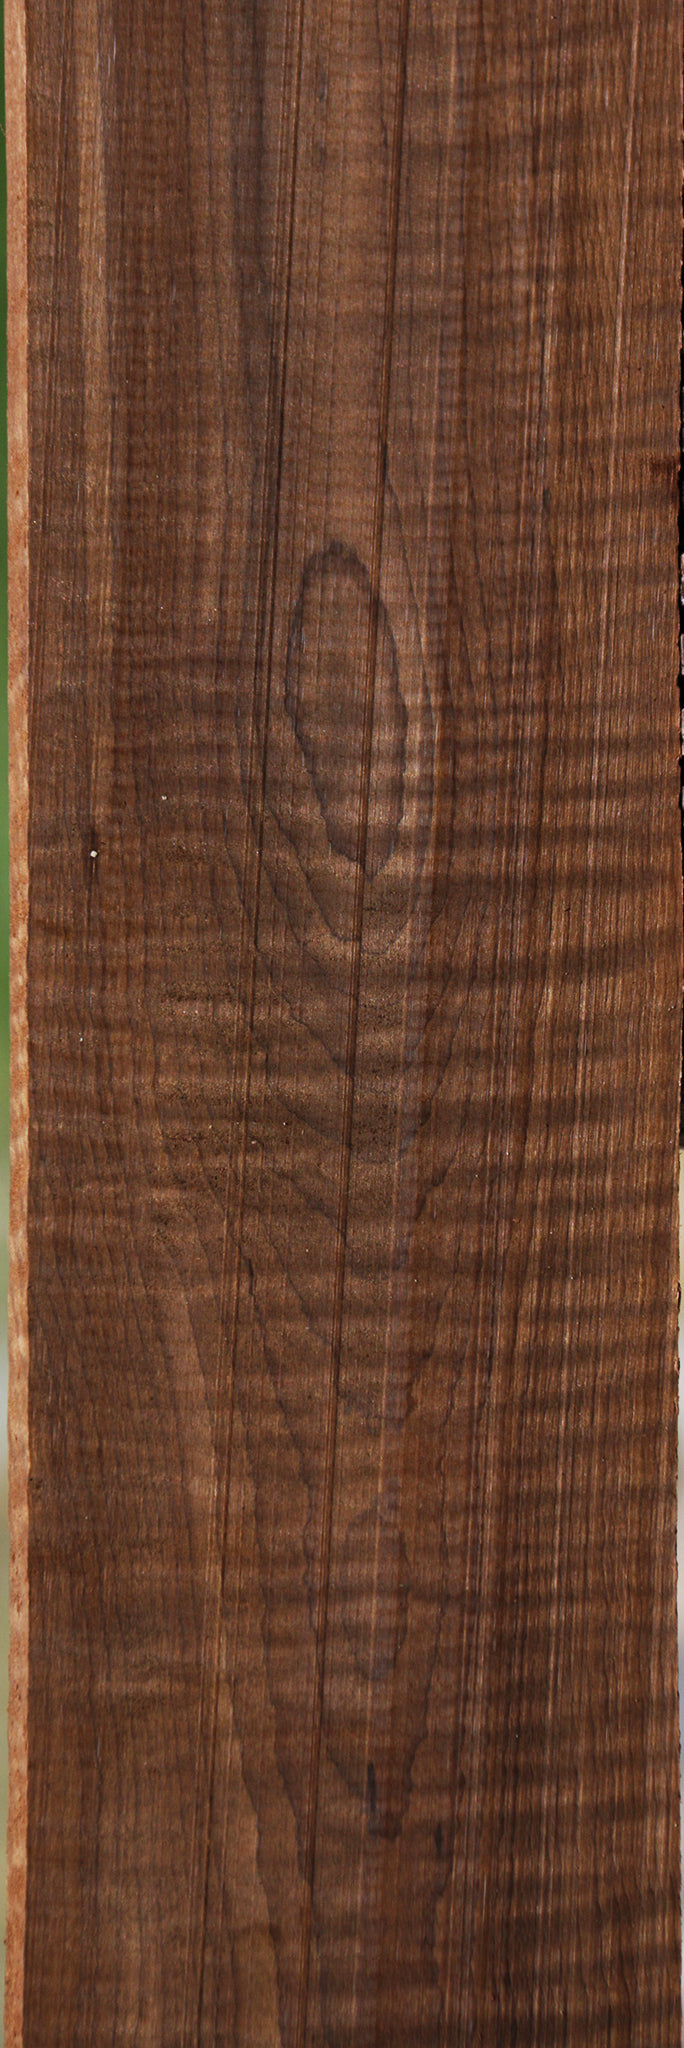 Extra Fancy Curly Caramelized Maple Lumber